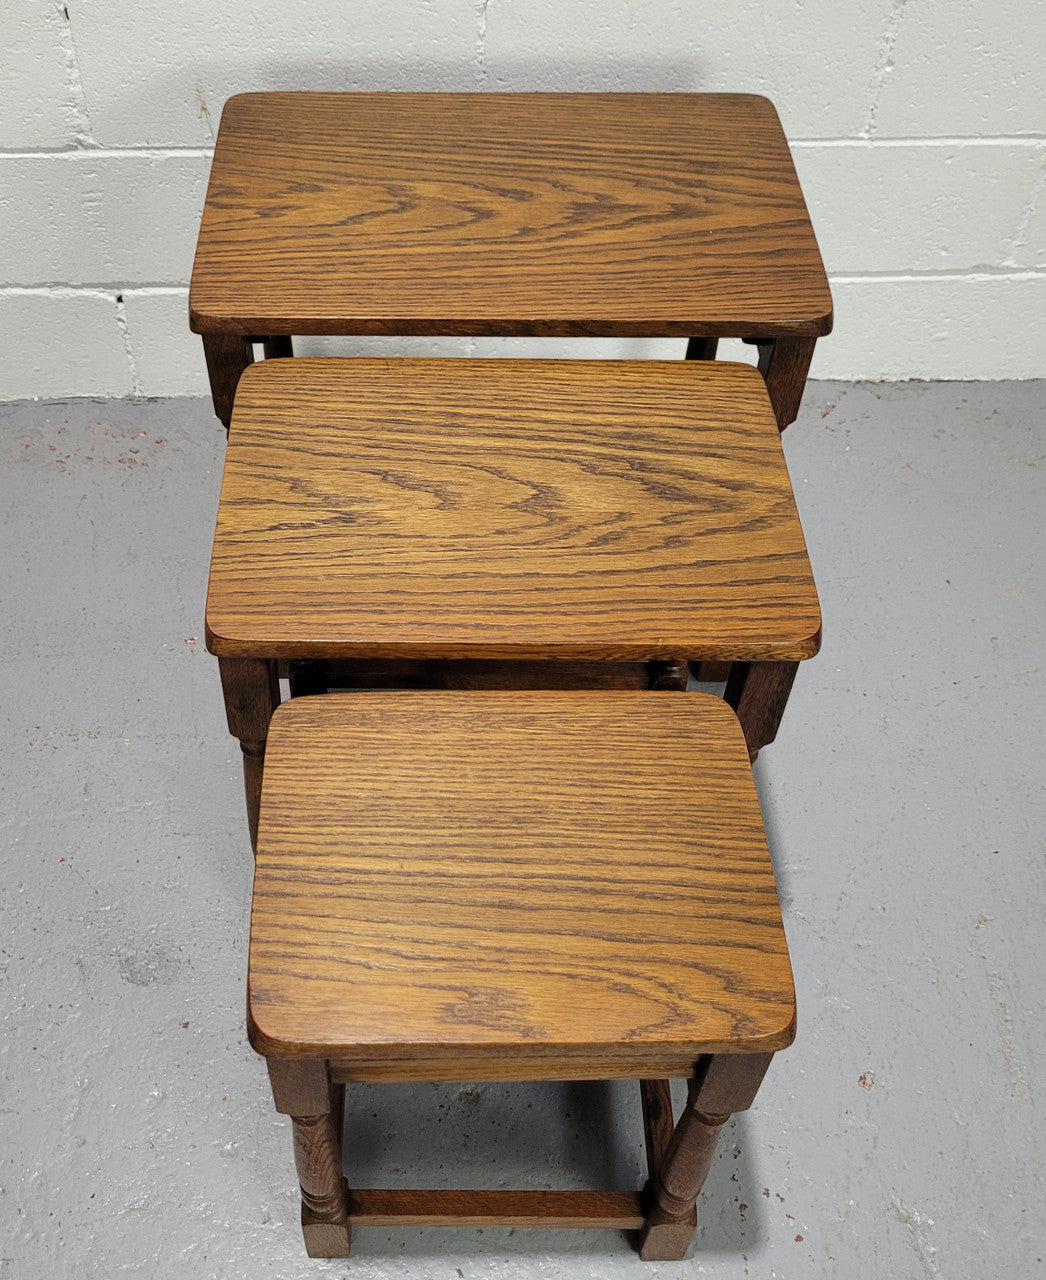 Lovely tudor oak style three nest tables. Circa 1950, In good original detailed condition.